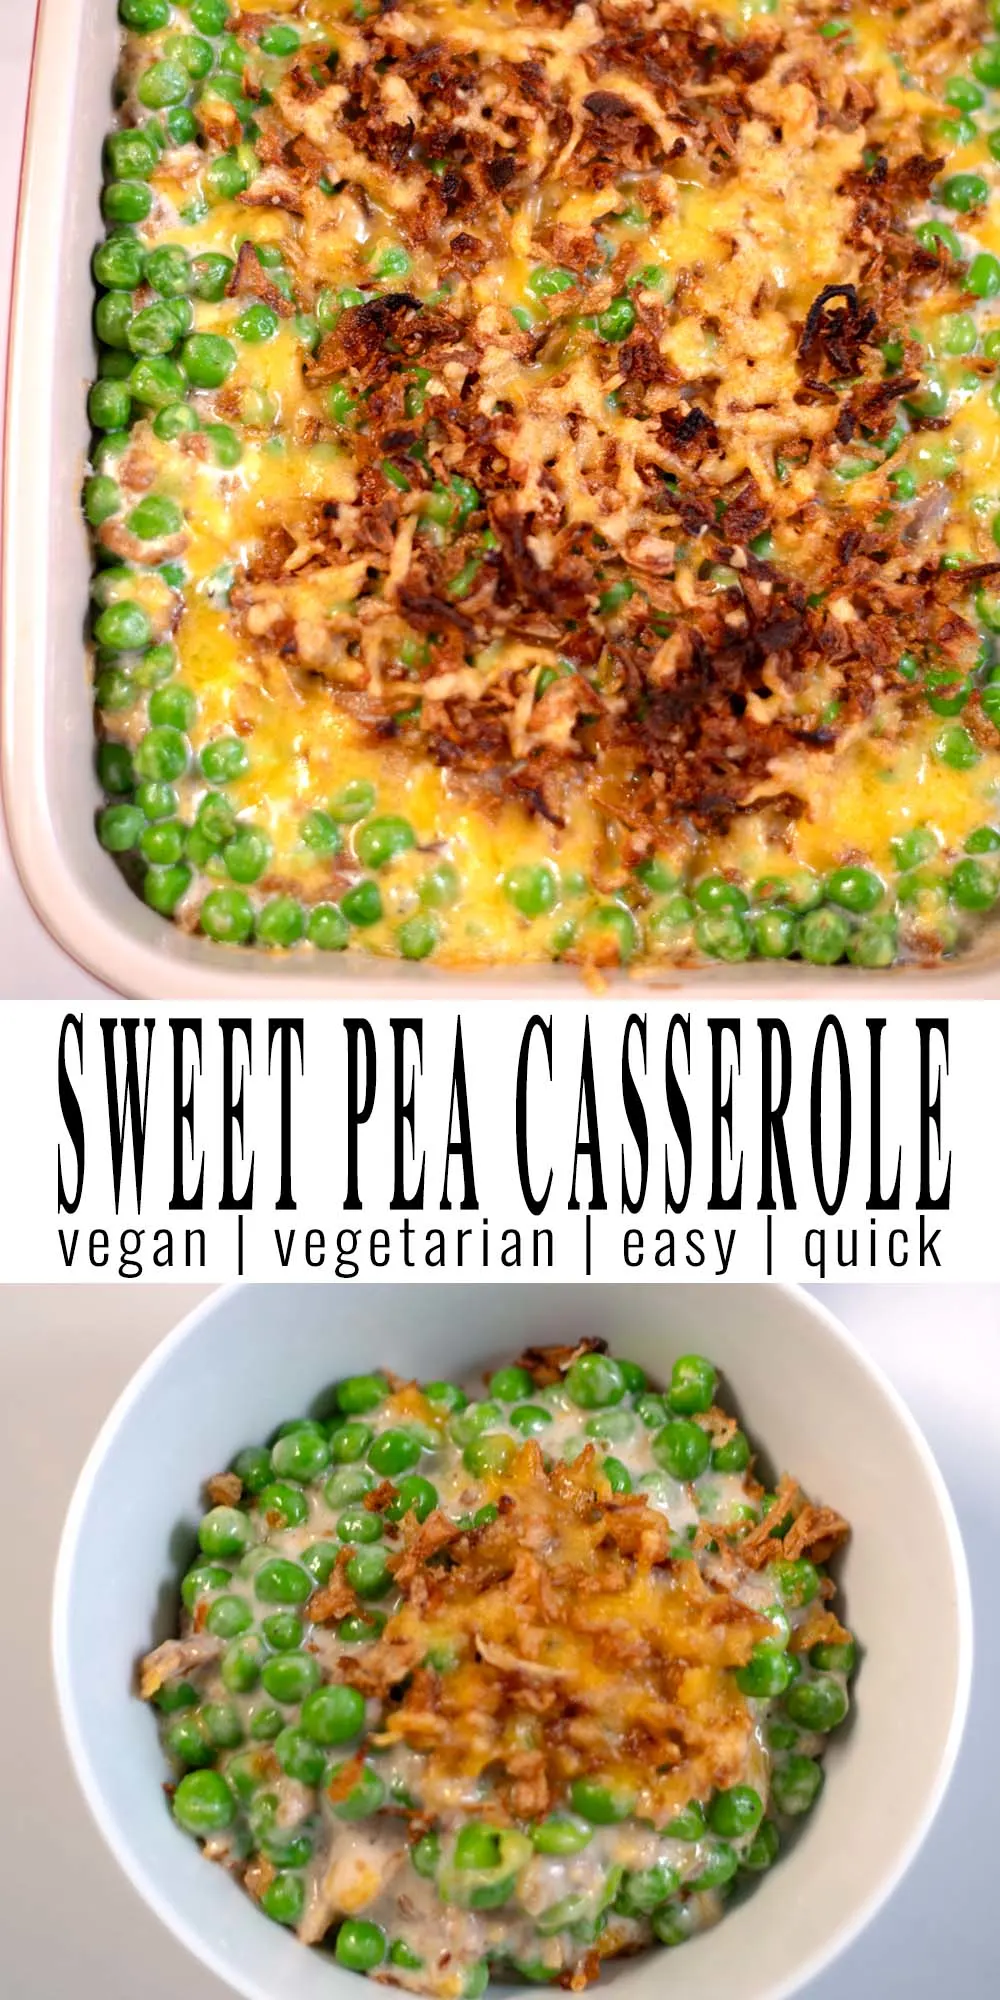 Two photos of Sweet Pea Casserole with recipe title text.